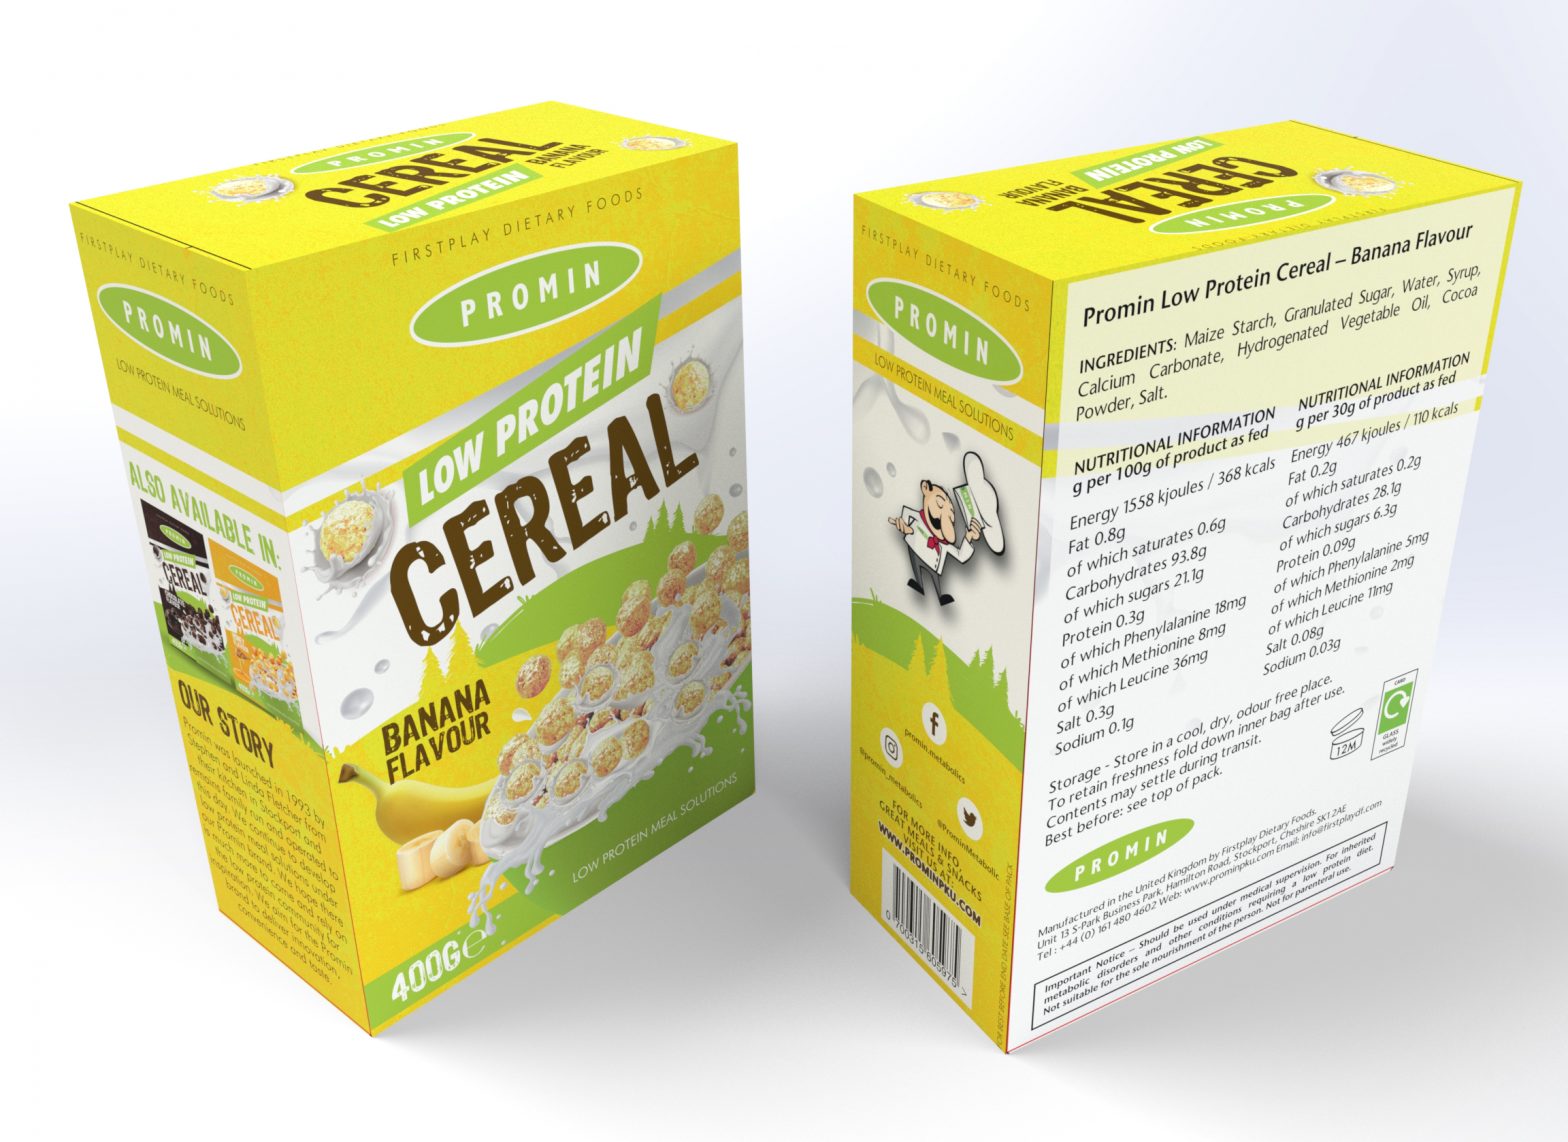 Promin Low Protein Cereal Banana